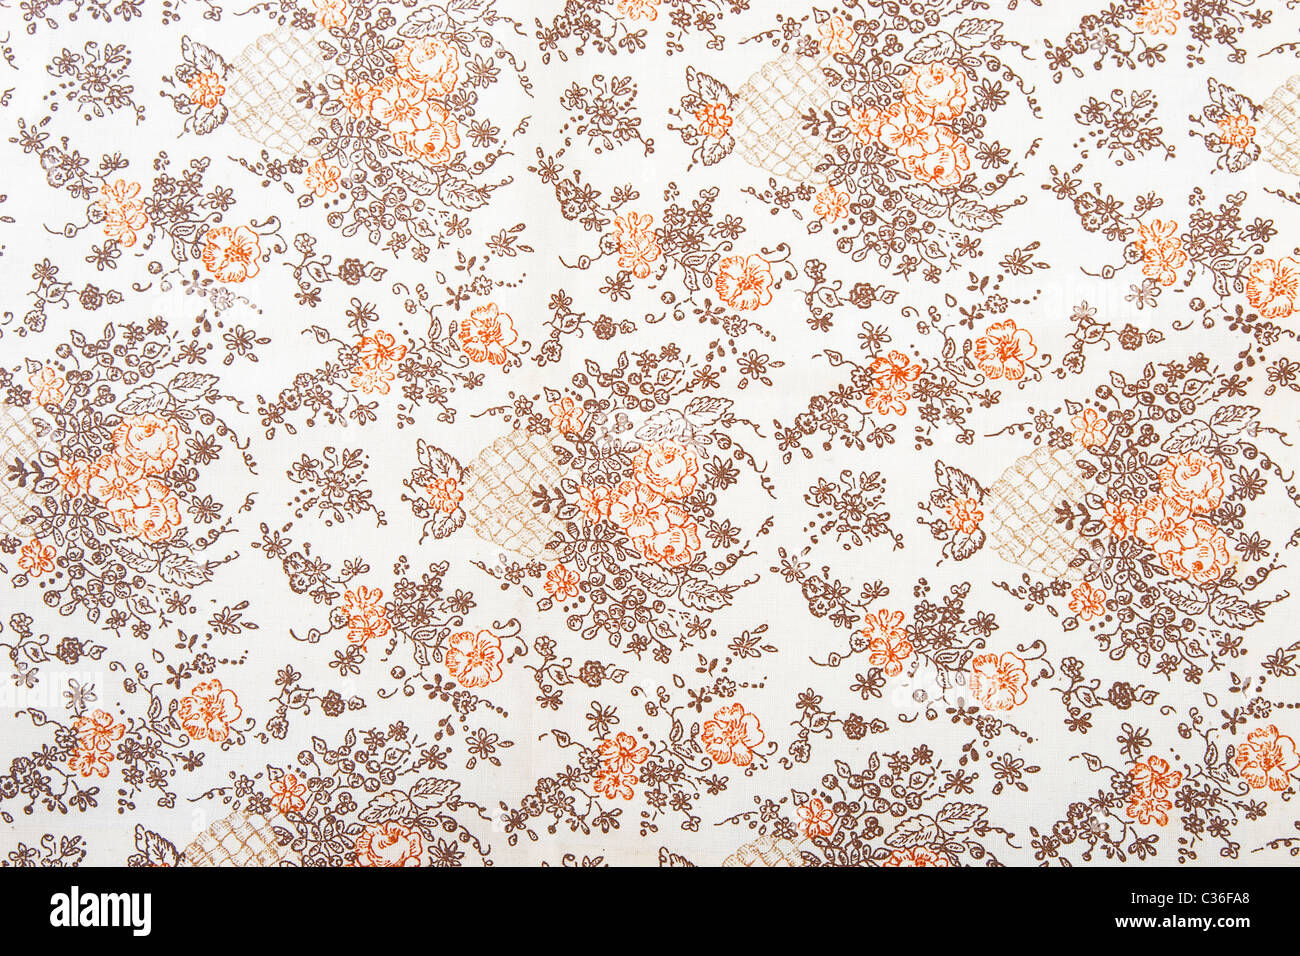 flower fabric texture, orange and brown plants on white background Stock Photo